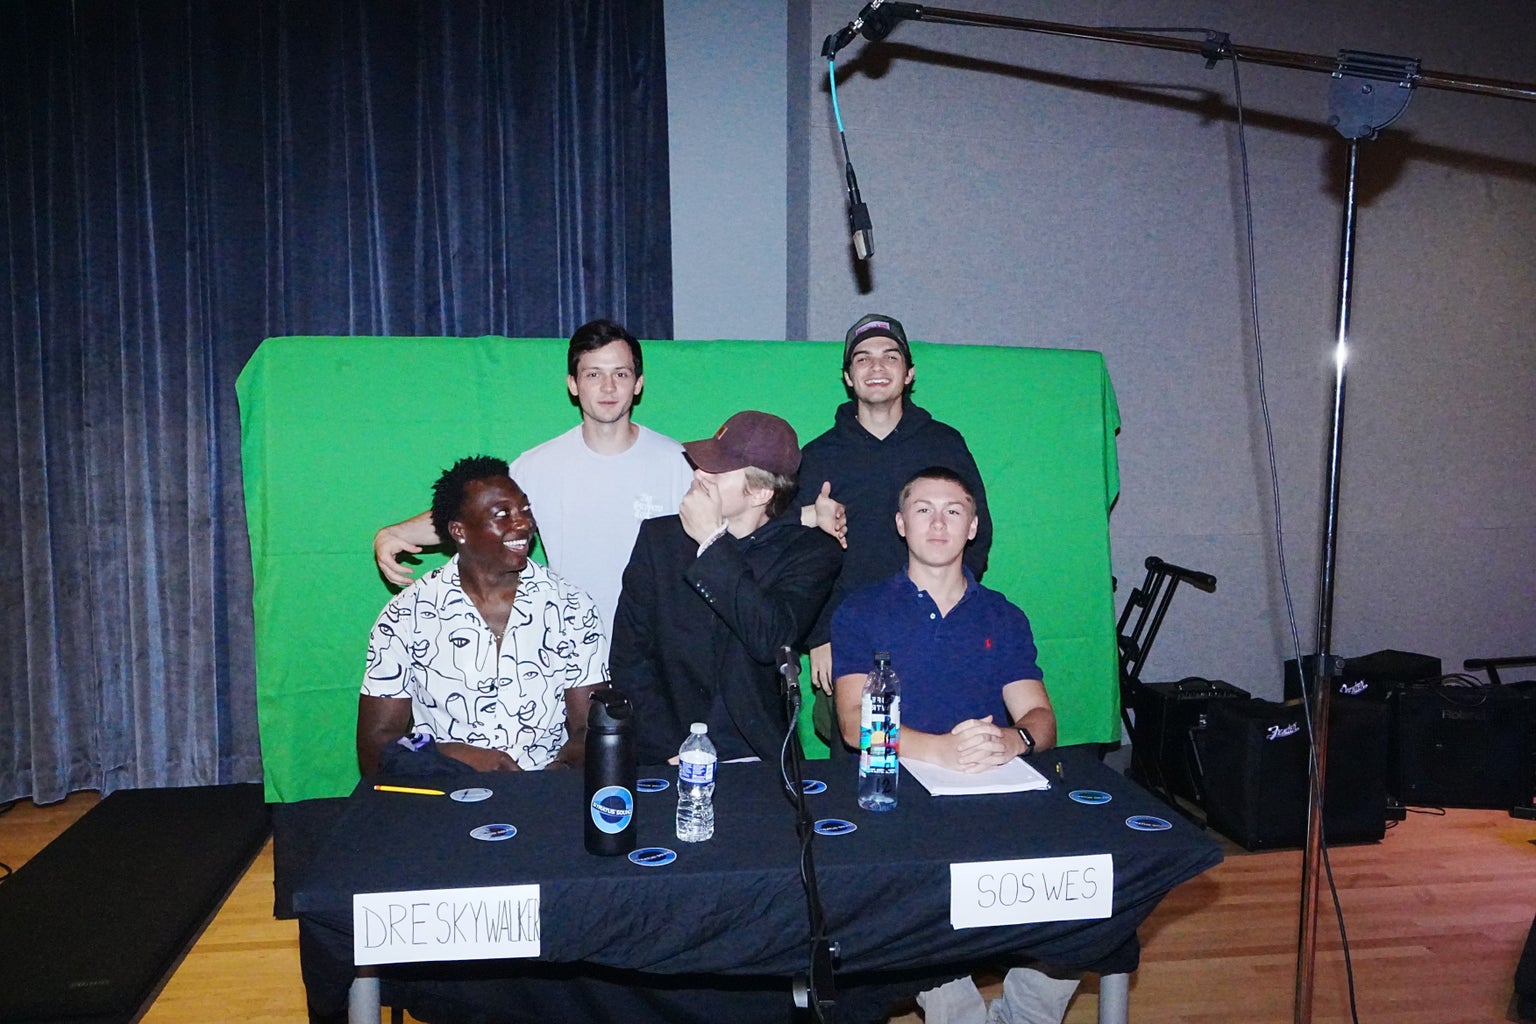 Stratus Sound (artist collective) in front of a green screen